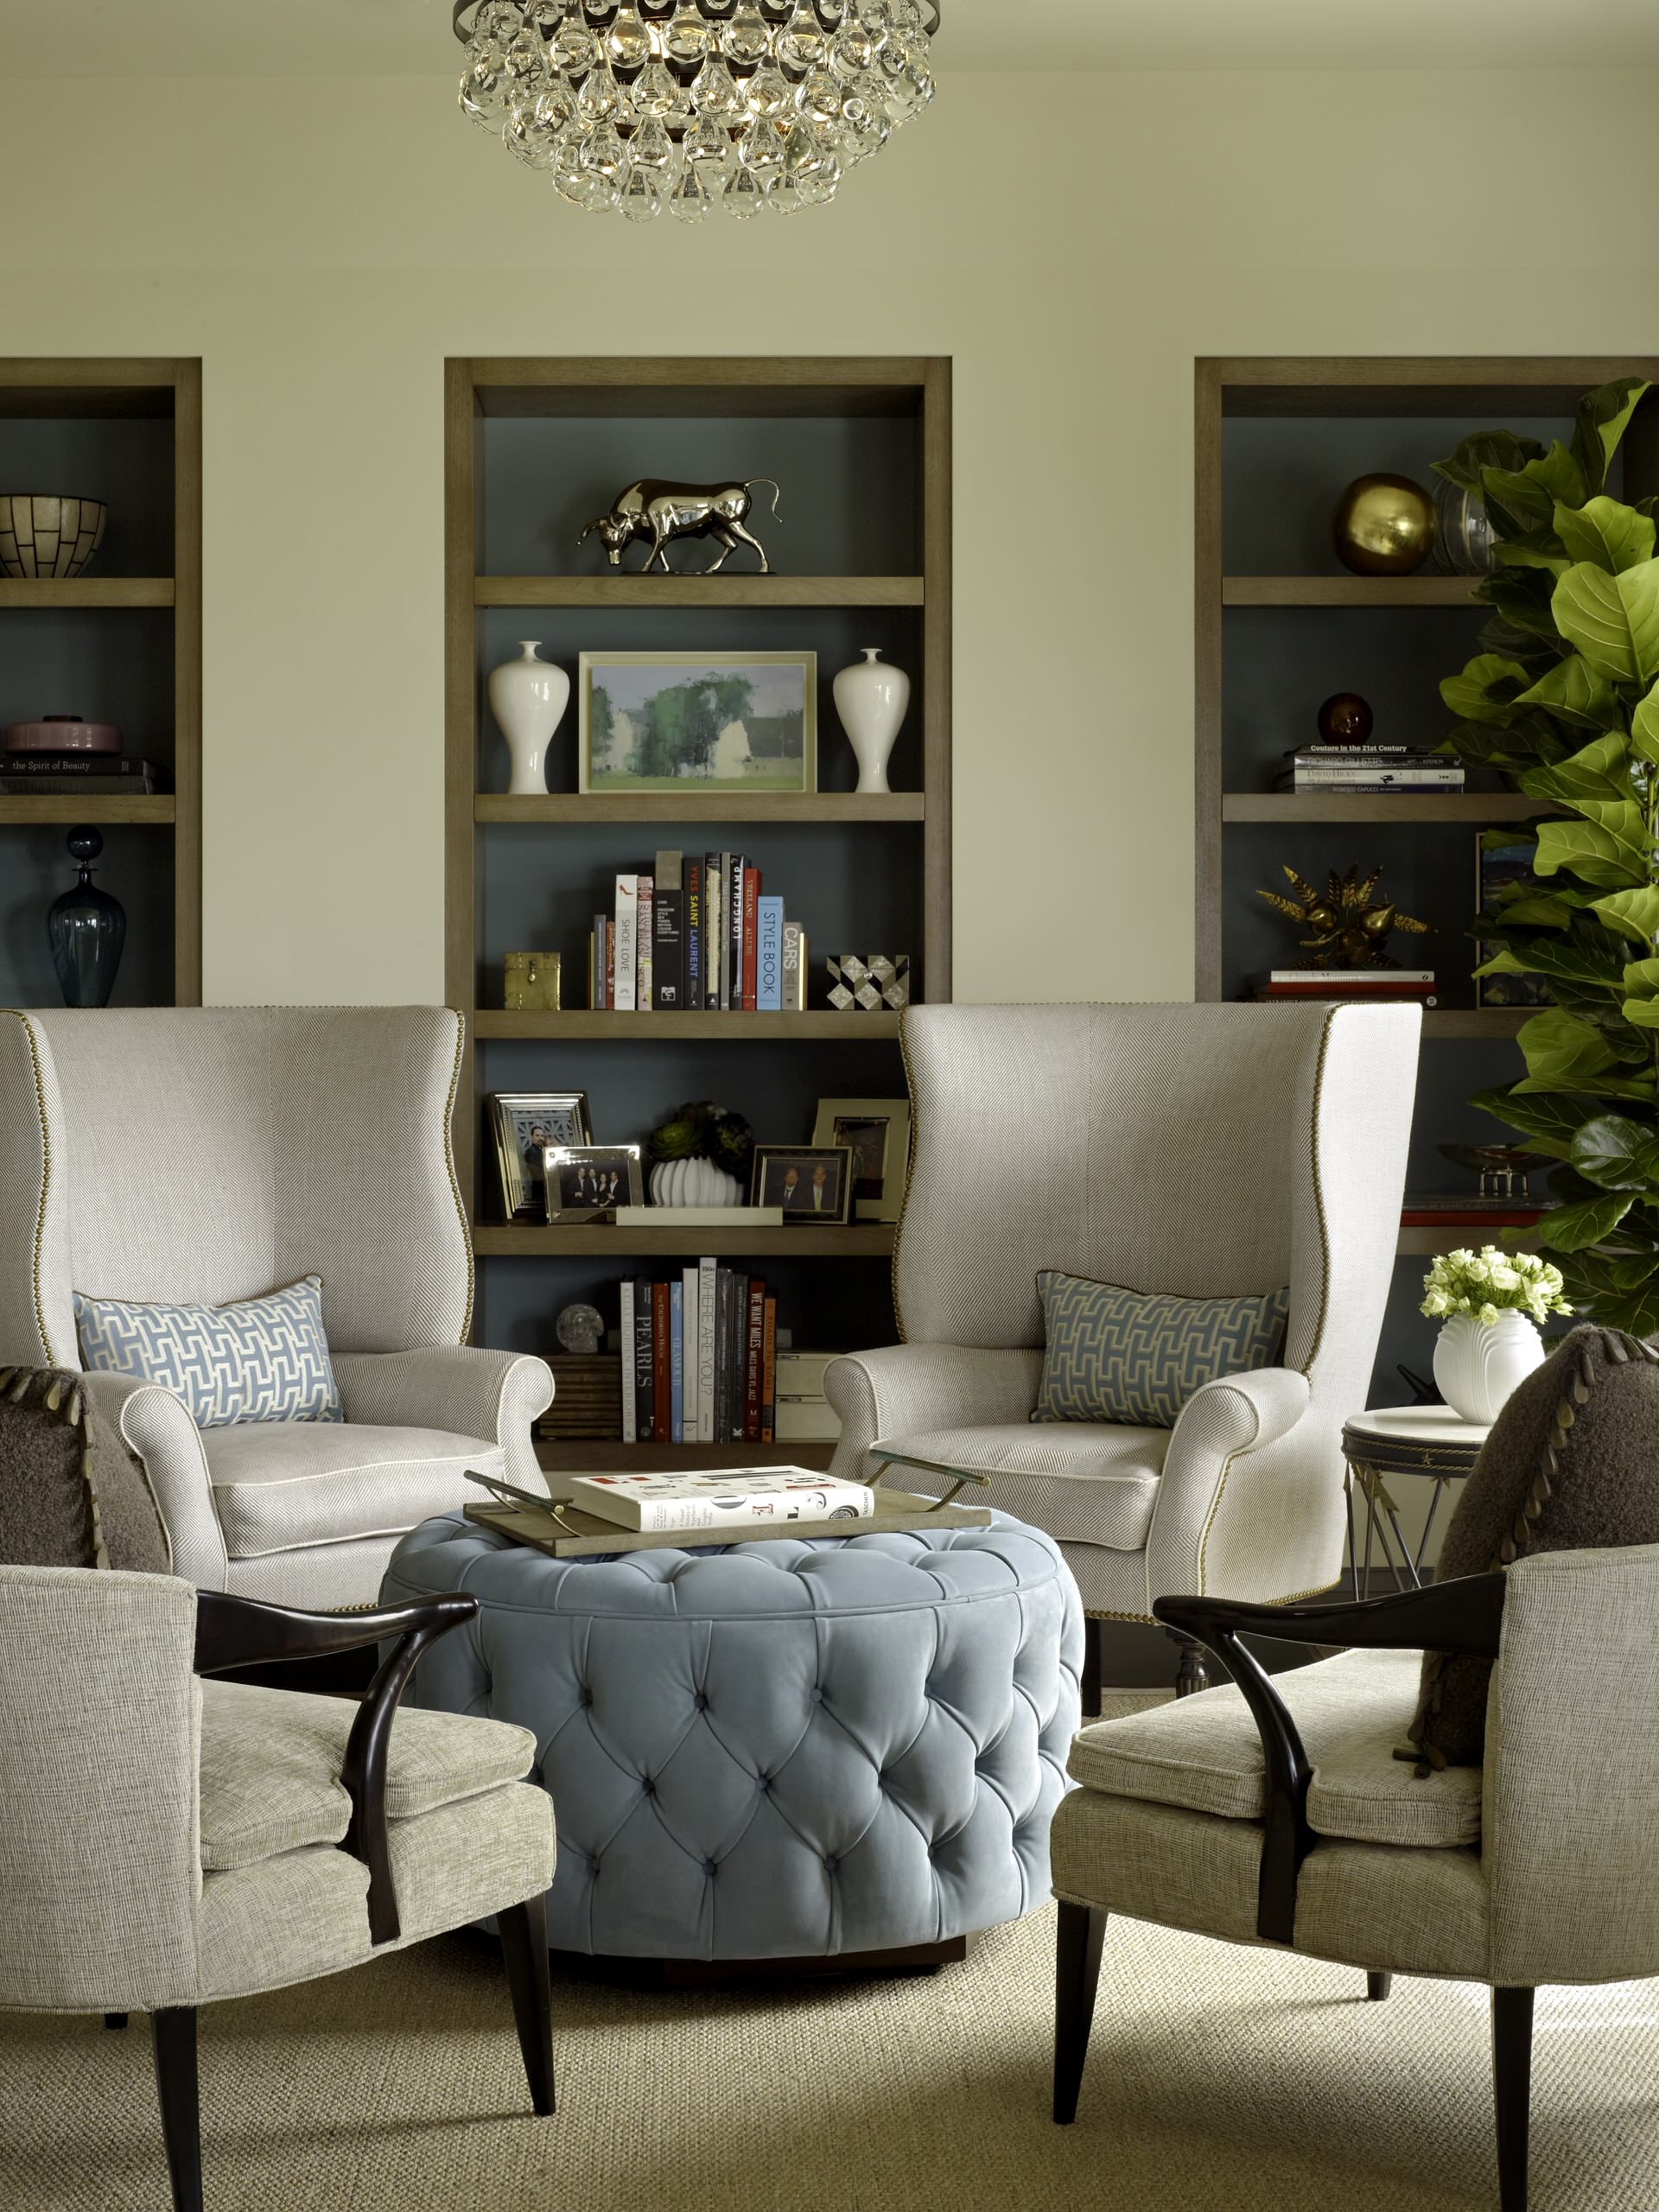 Instead of sofas create an intimate seating group with wingback